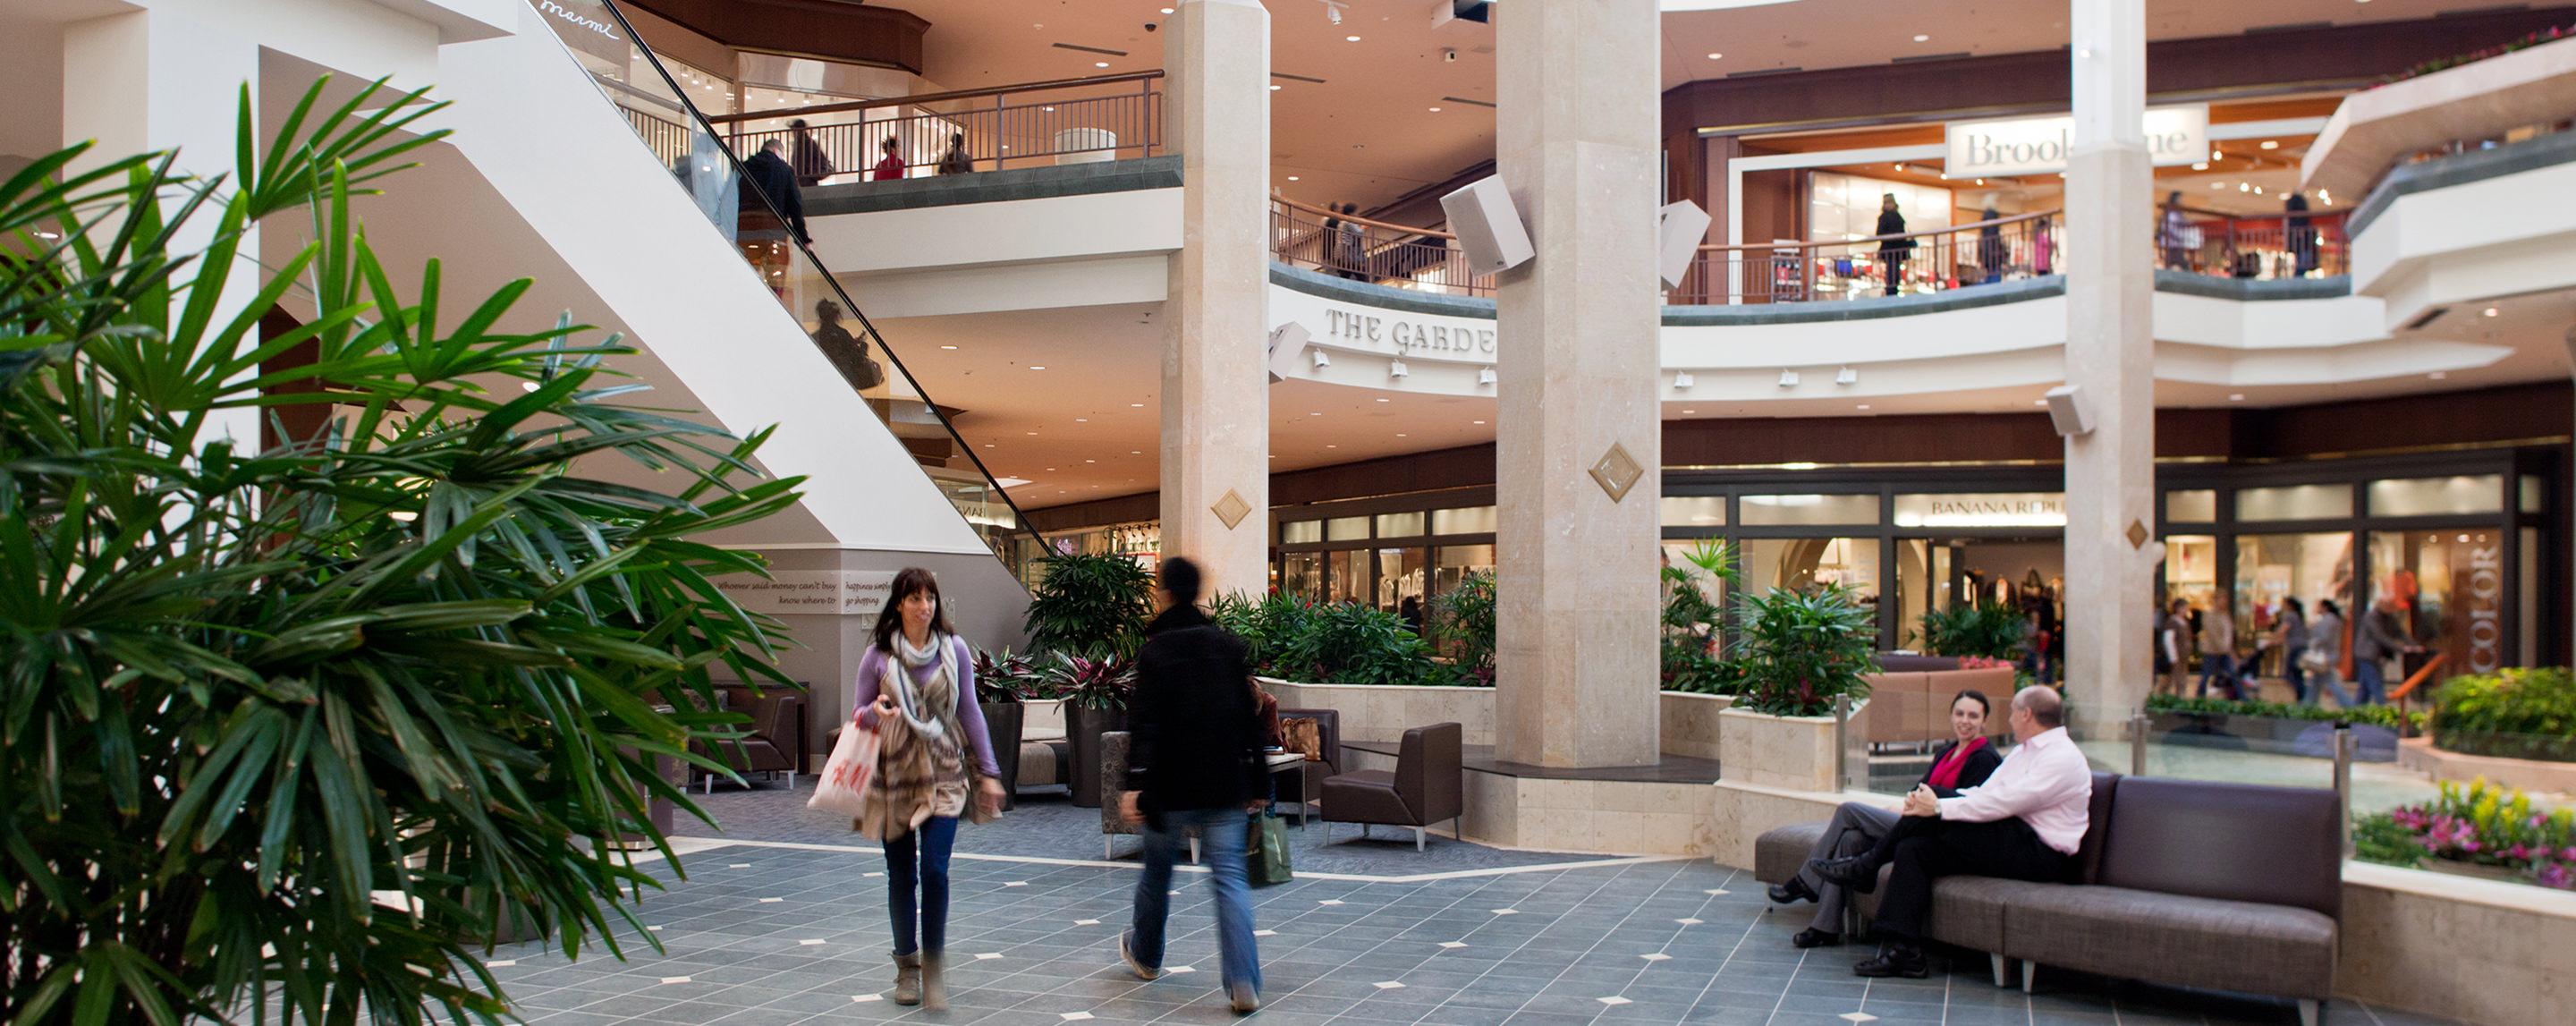 People walk and sit on benches inside of a multi-story mall. A Marmi storefront is visible.